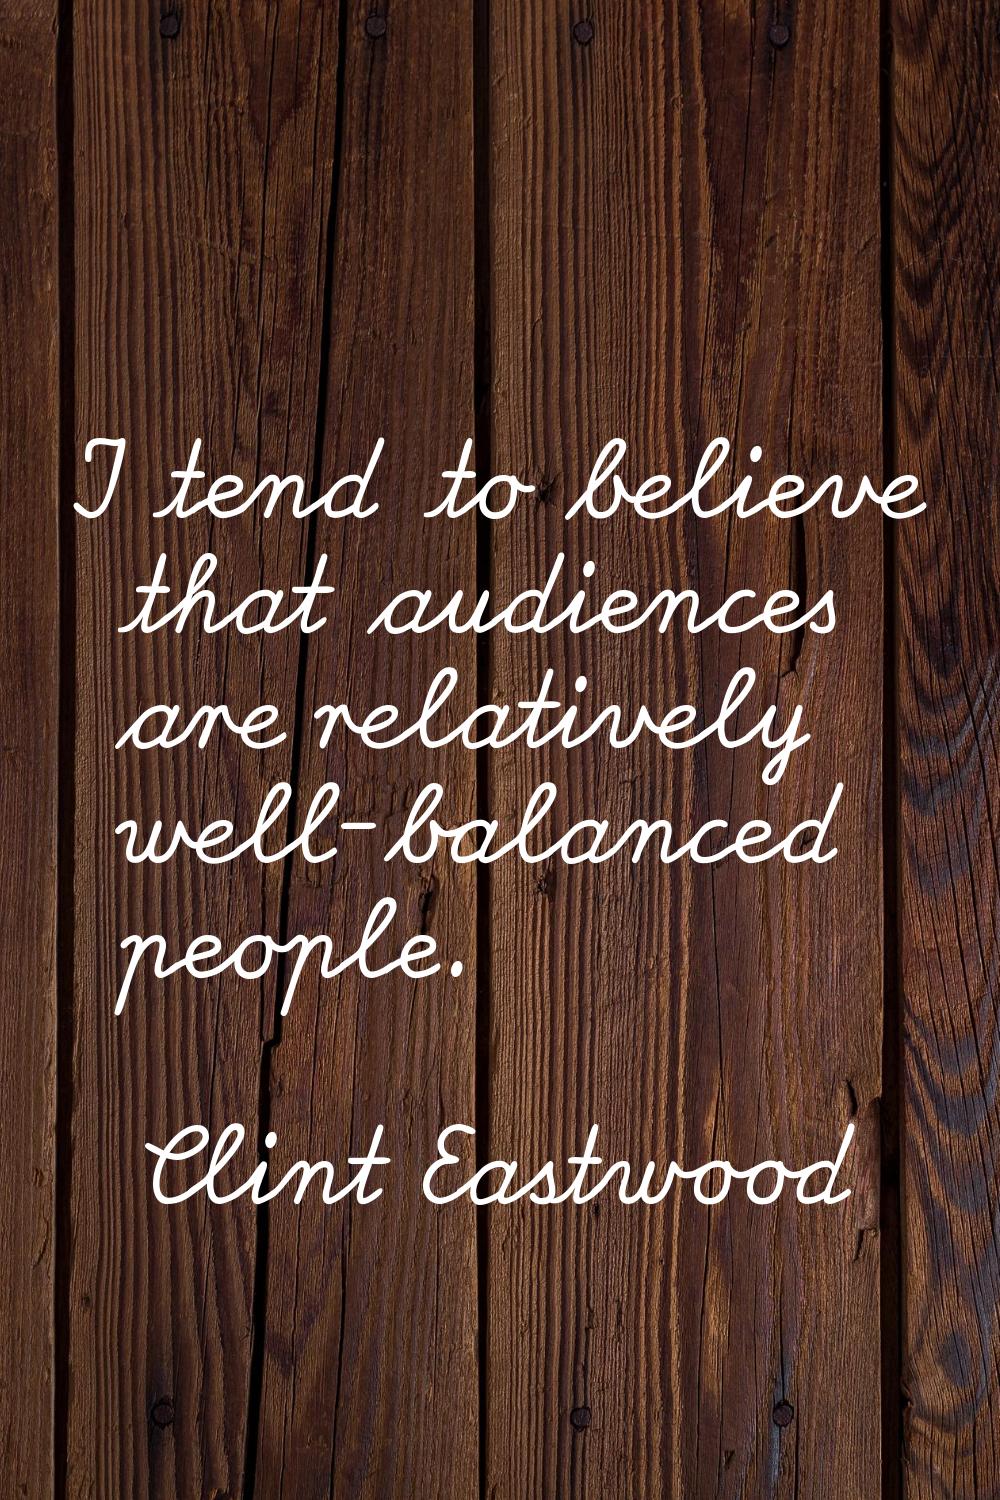 I tend to believe that audiences are relatively well-balanced people.